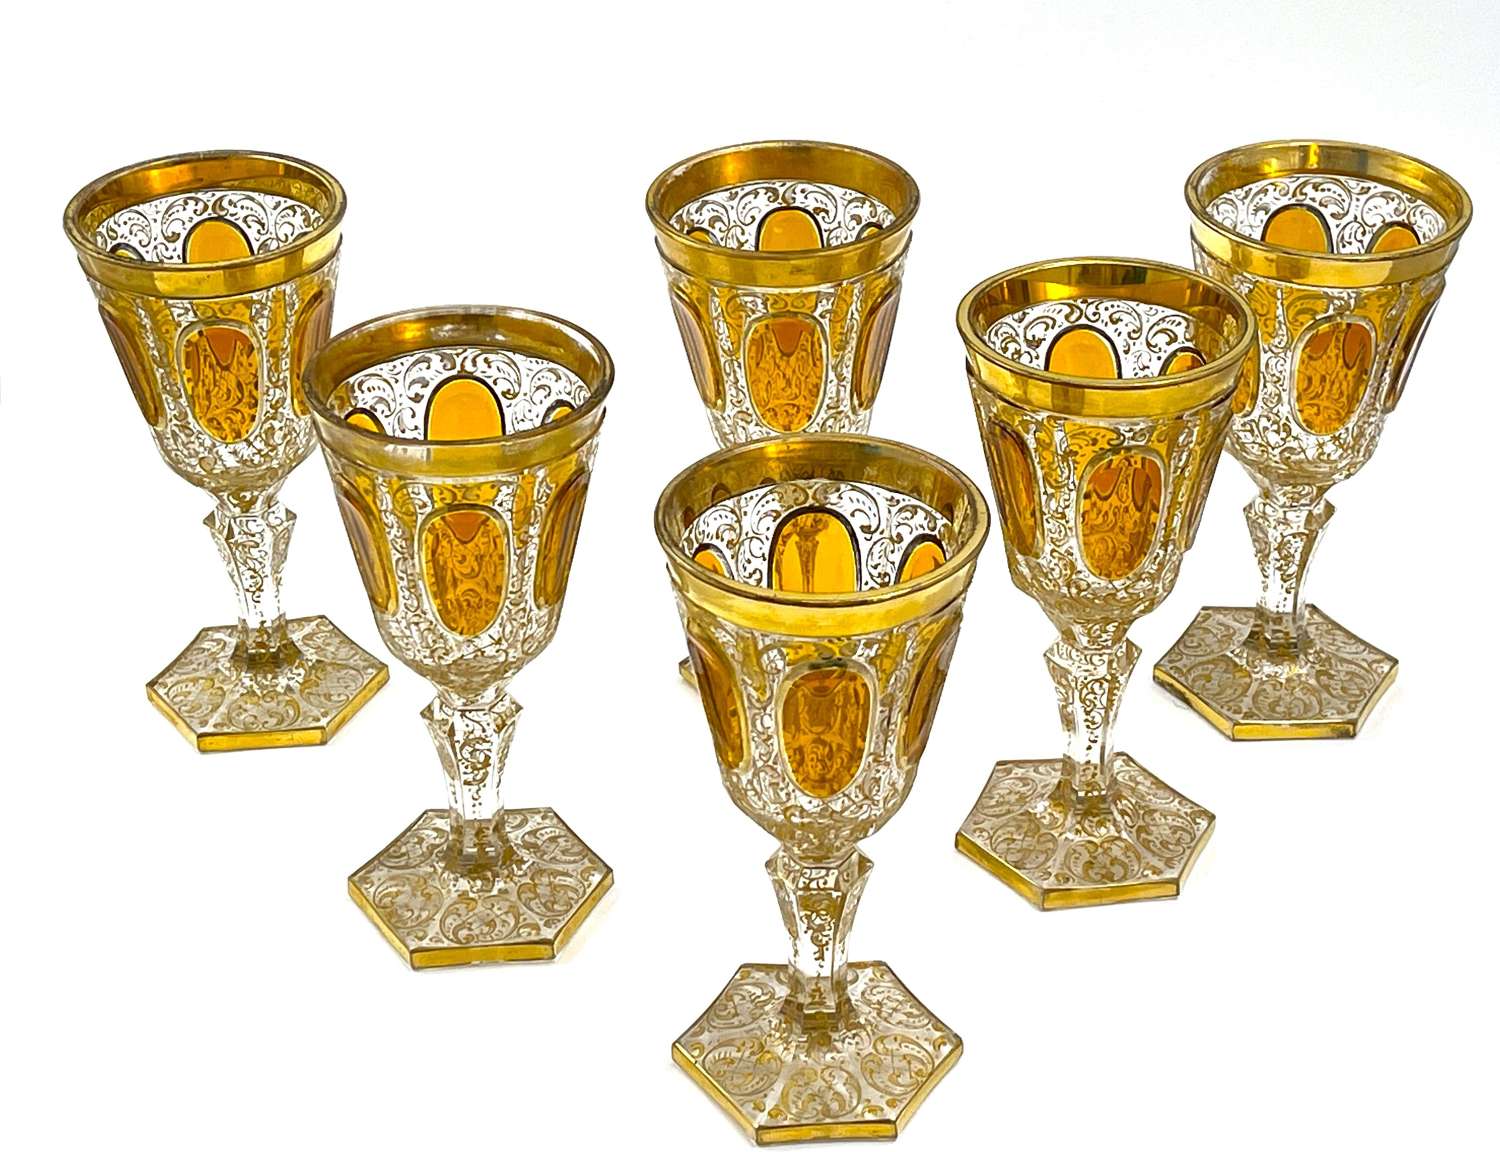 A Set of 6 Antique Moser Glasses Decorated with Amber Jewel Cabouchons